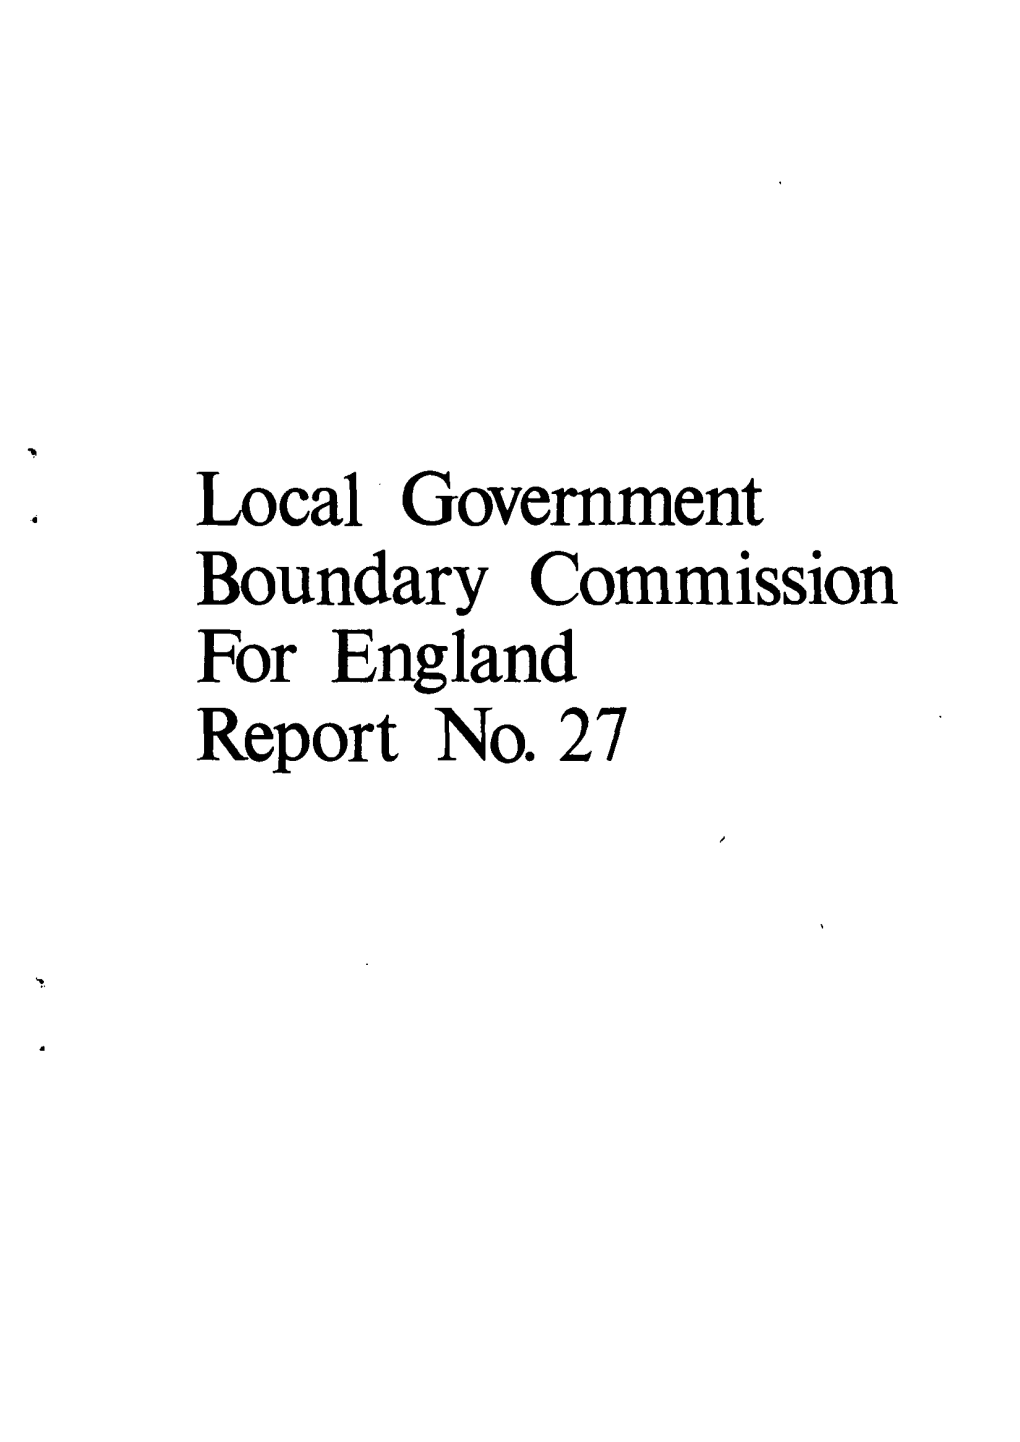 Local Government Boundary Commission for England Report No. 27 LOCAL